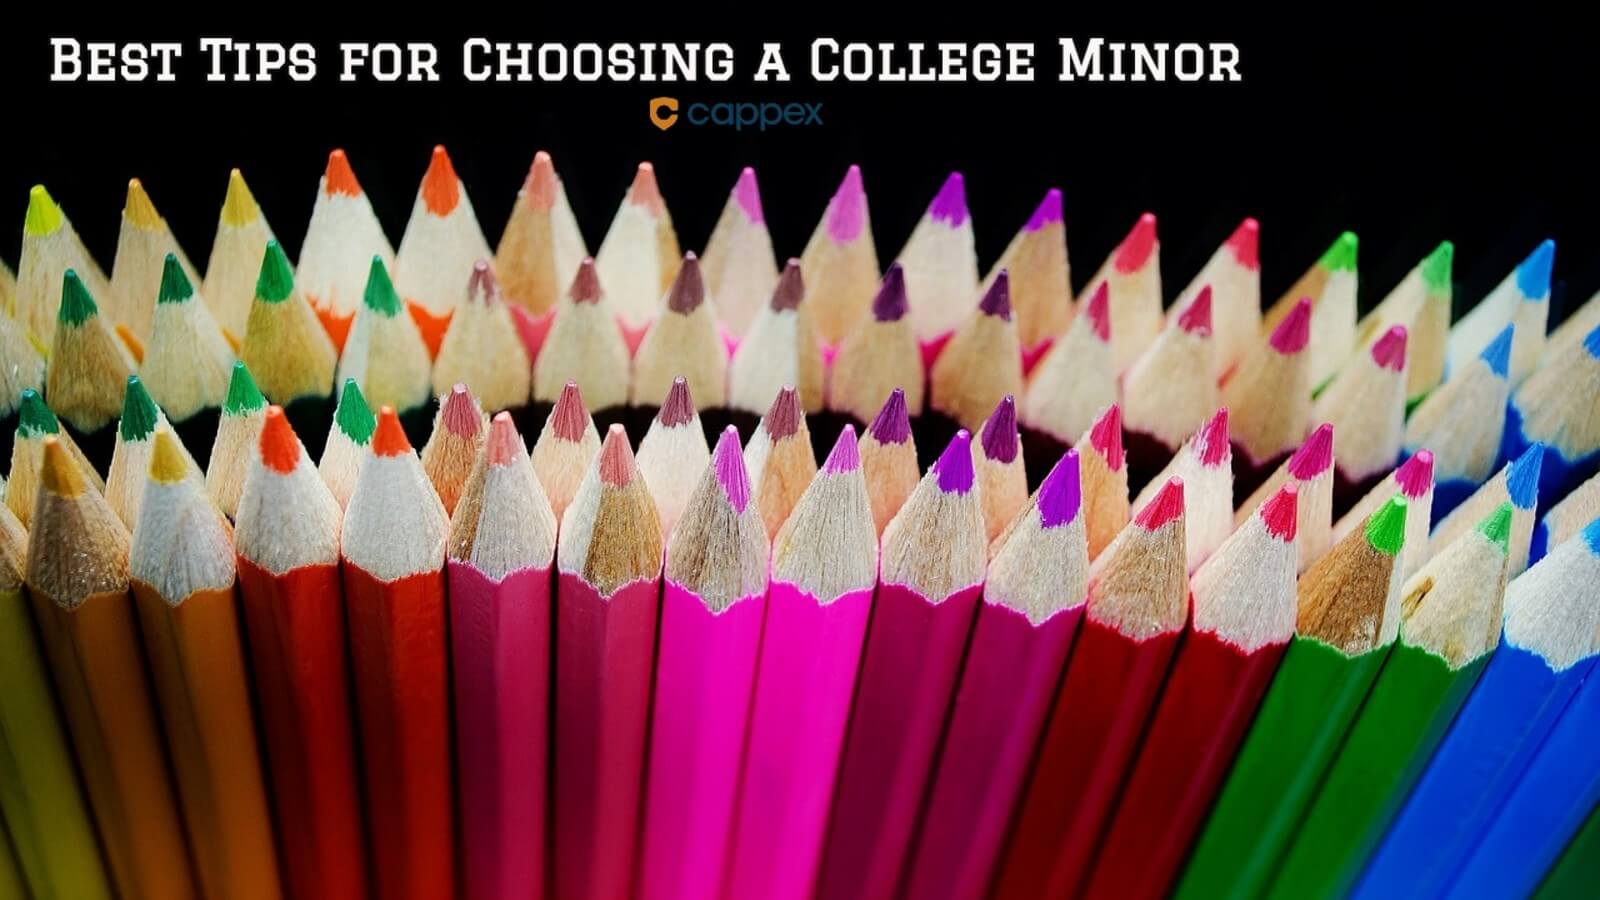 The Best Tips for Choosing a College Minor